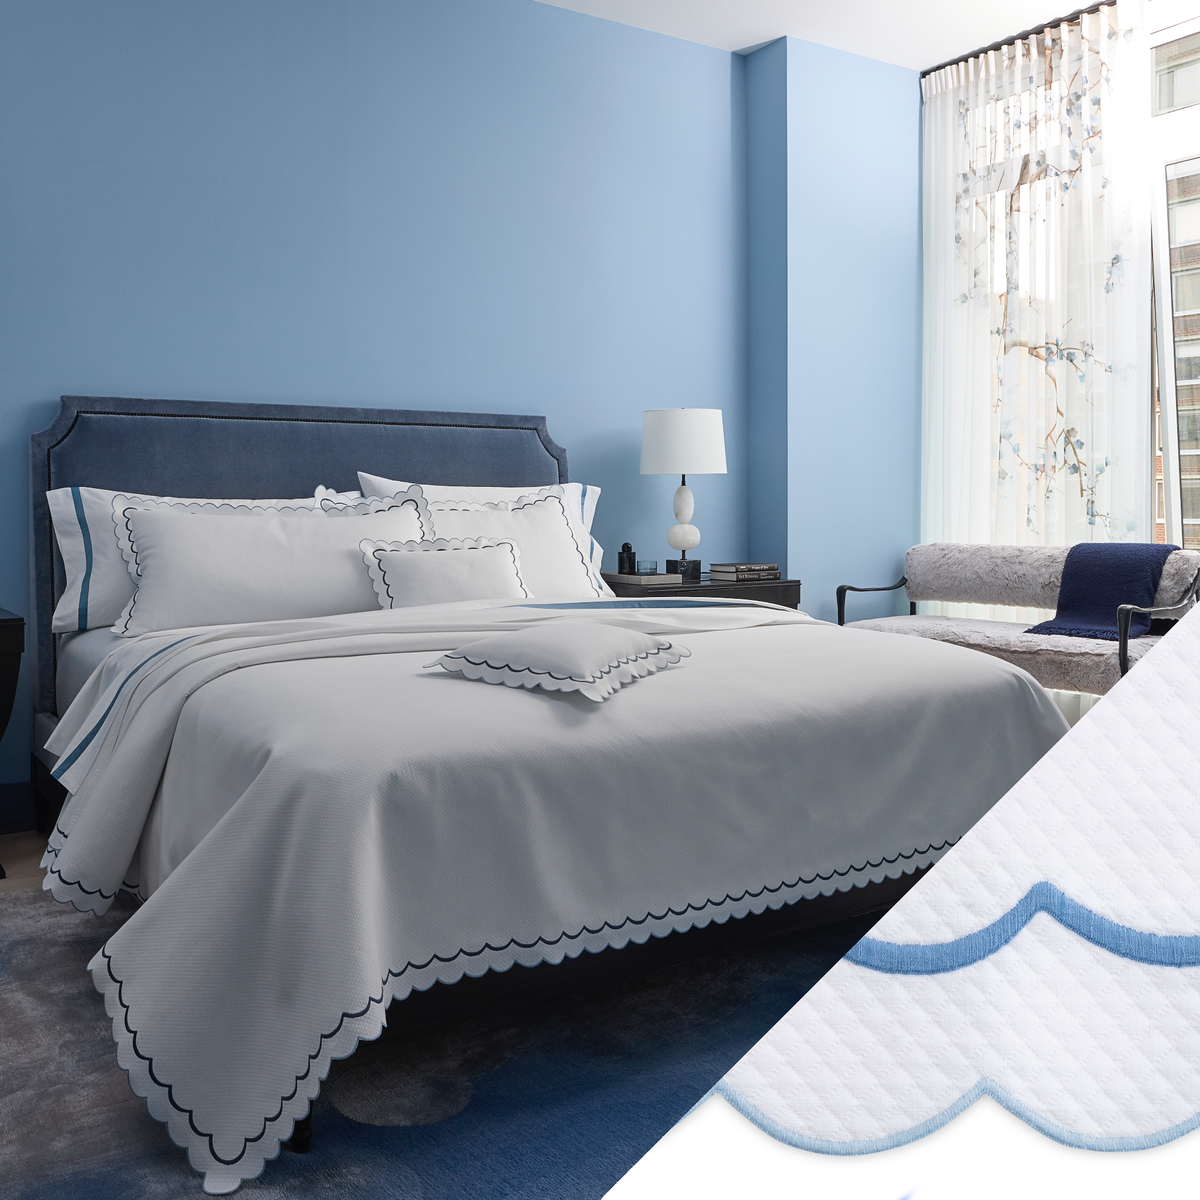 Full Bedding in a Room Dressed in Matouk India Pique Collection in Azure Color